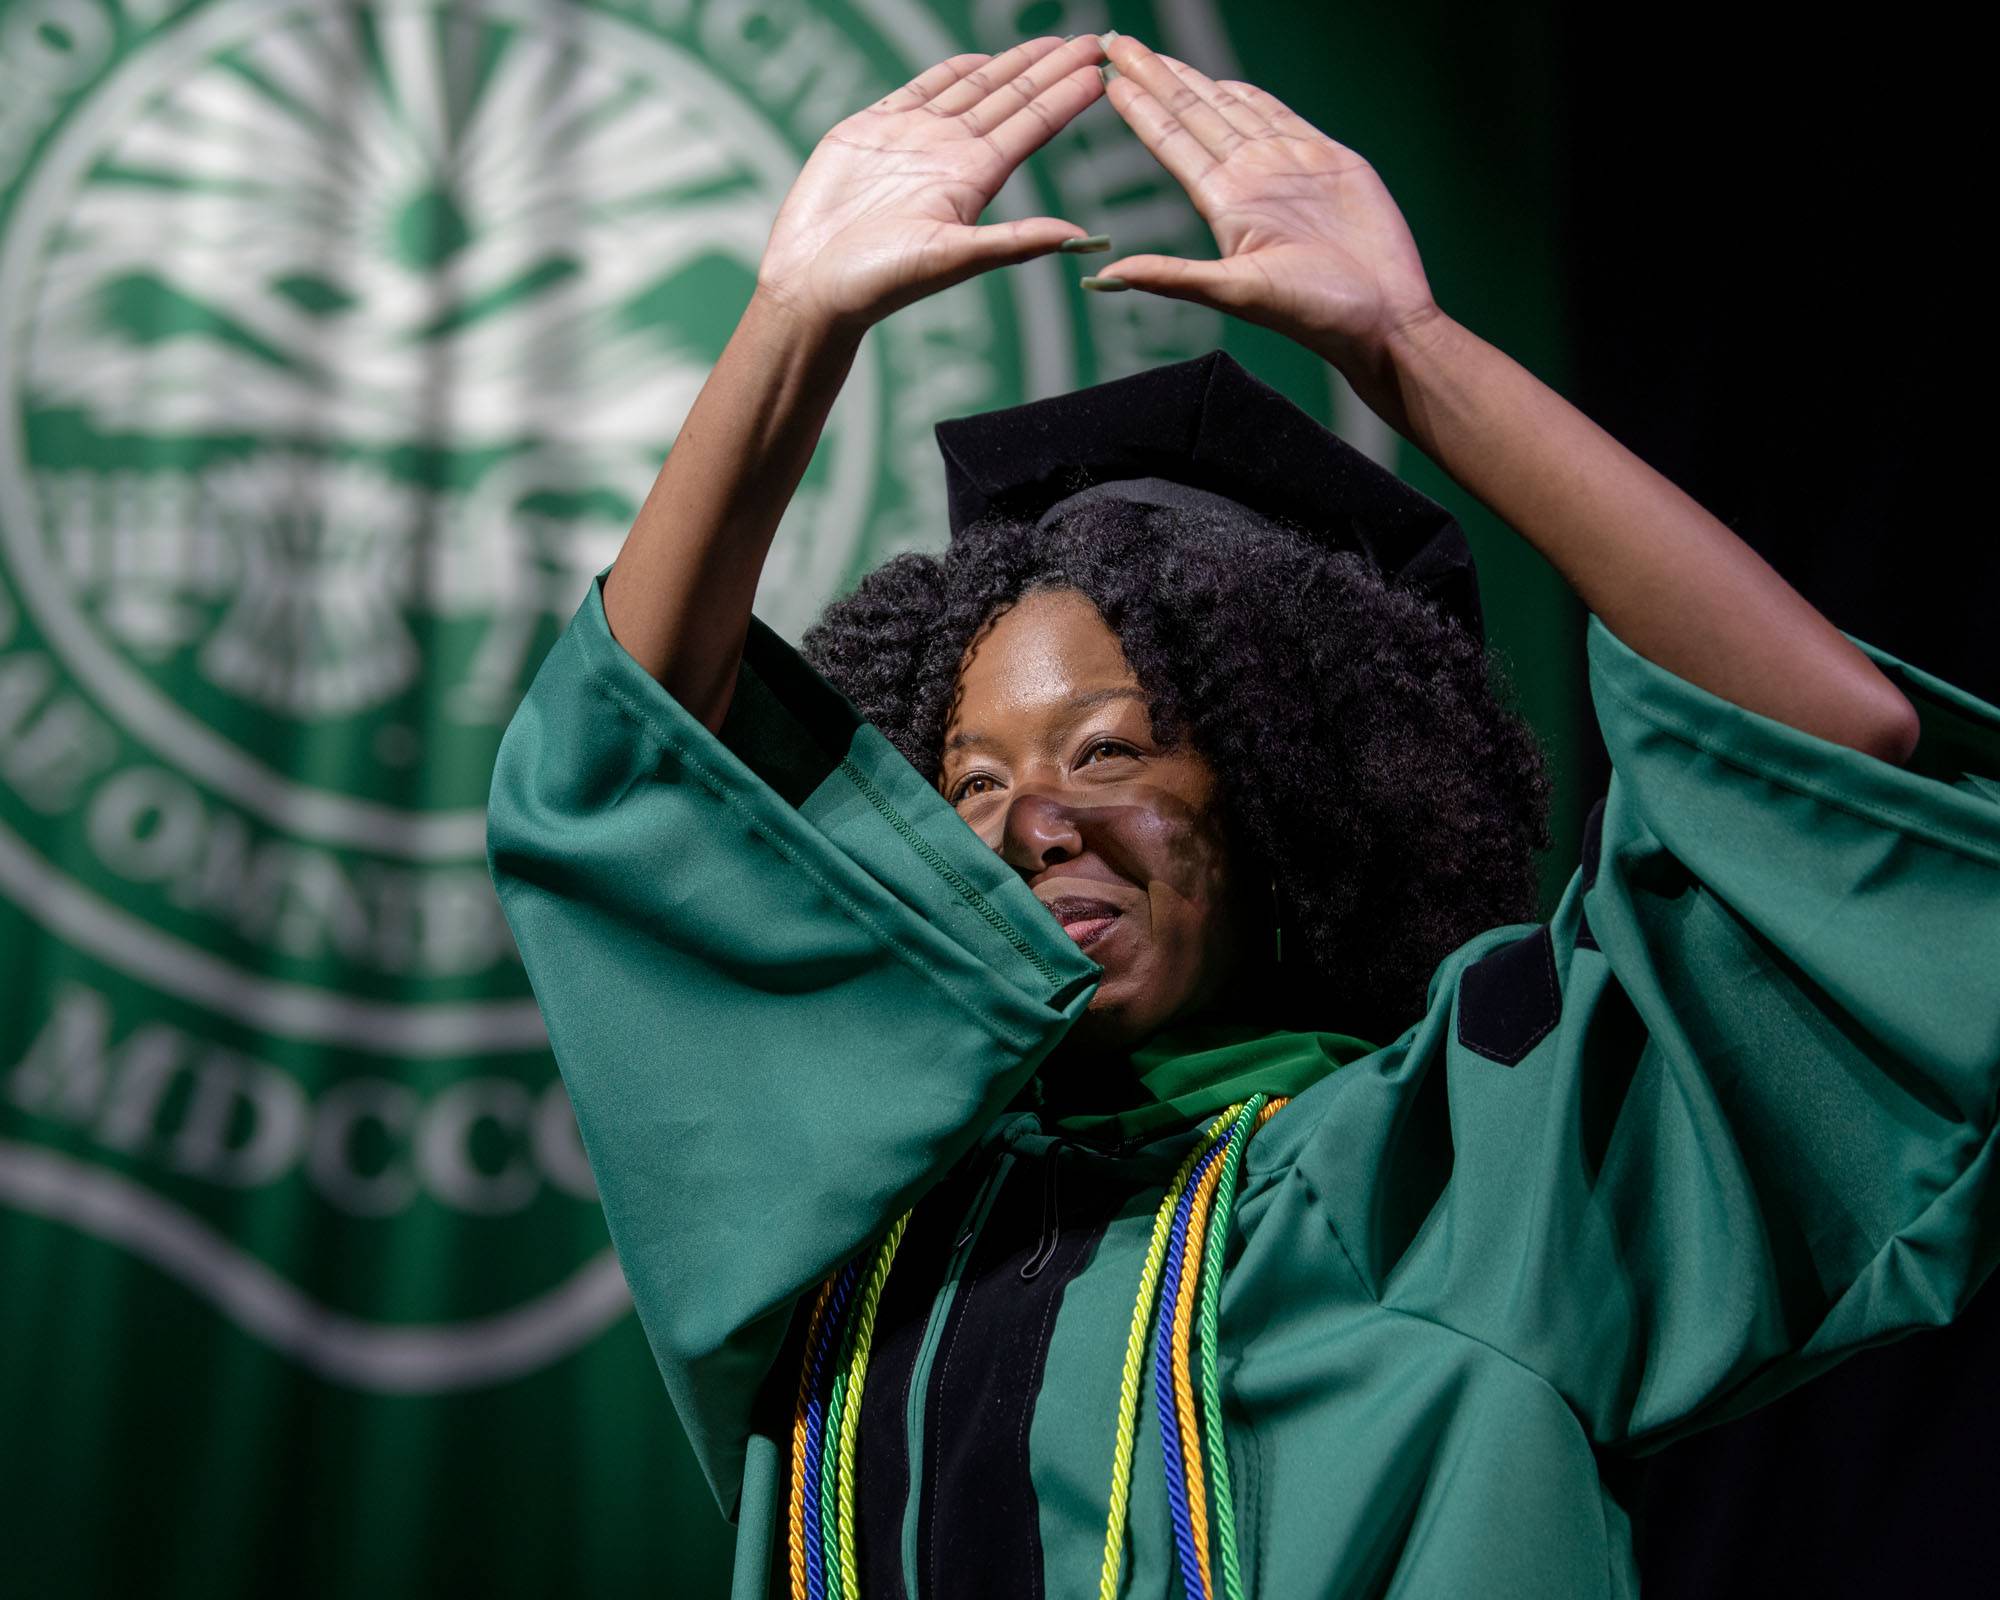 Family, friends and loved one were recognized at Commencement for the support they gave to students to help them achieve their goal of graduating from medical school.